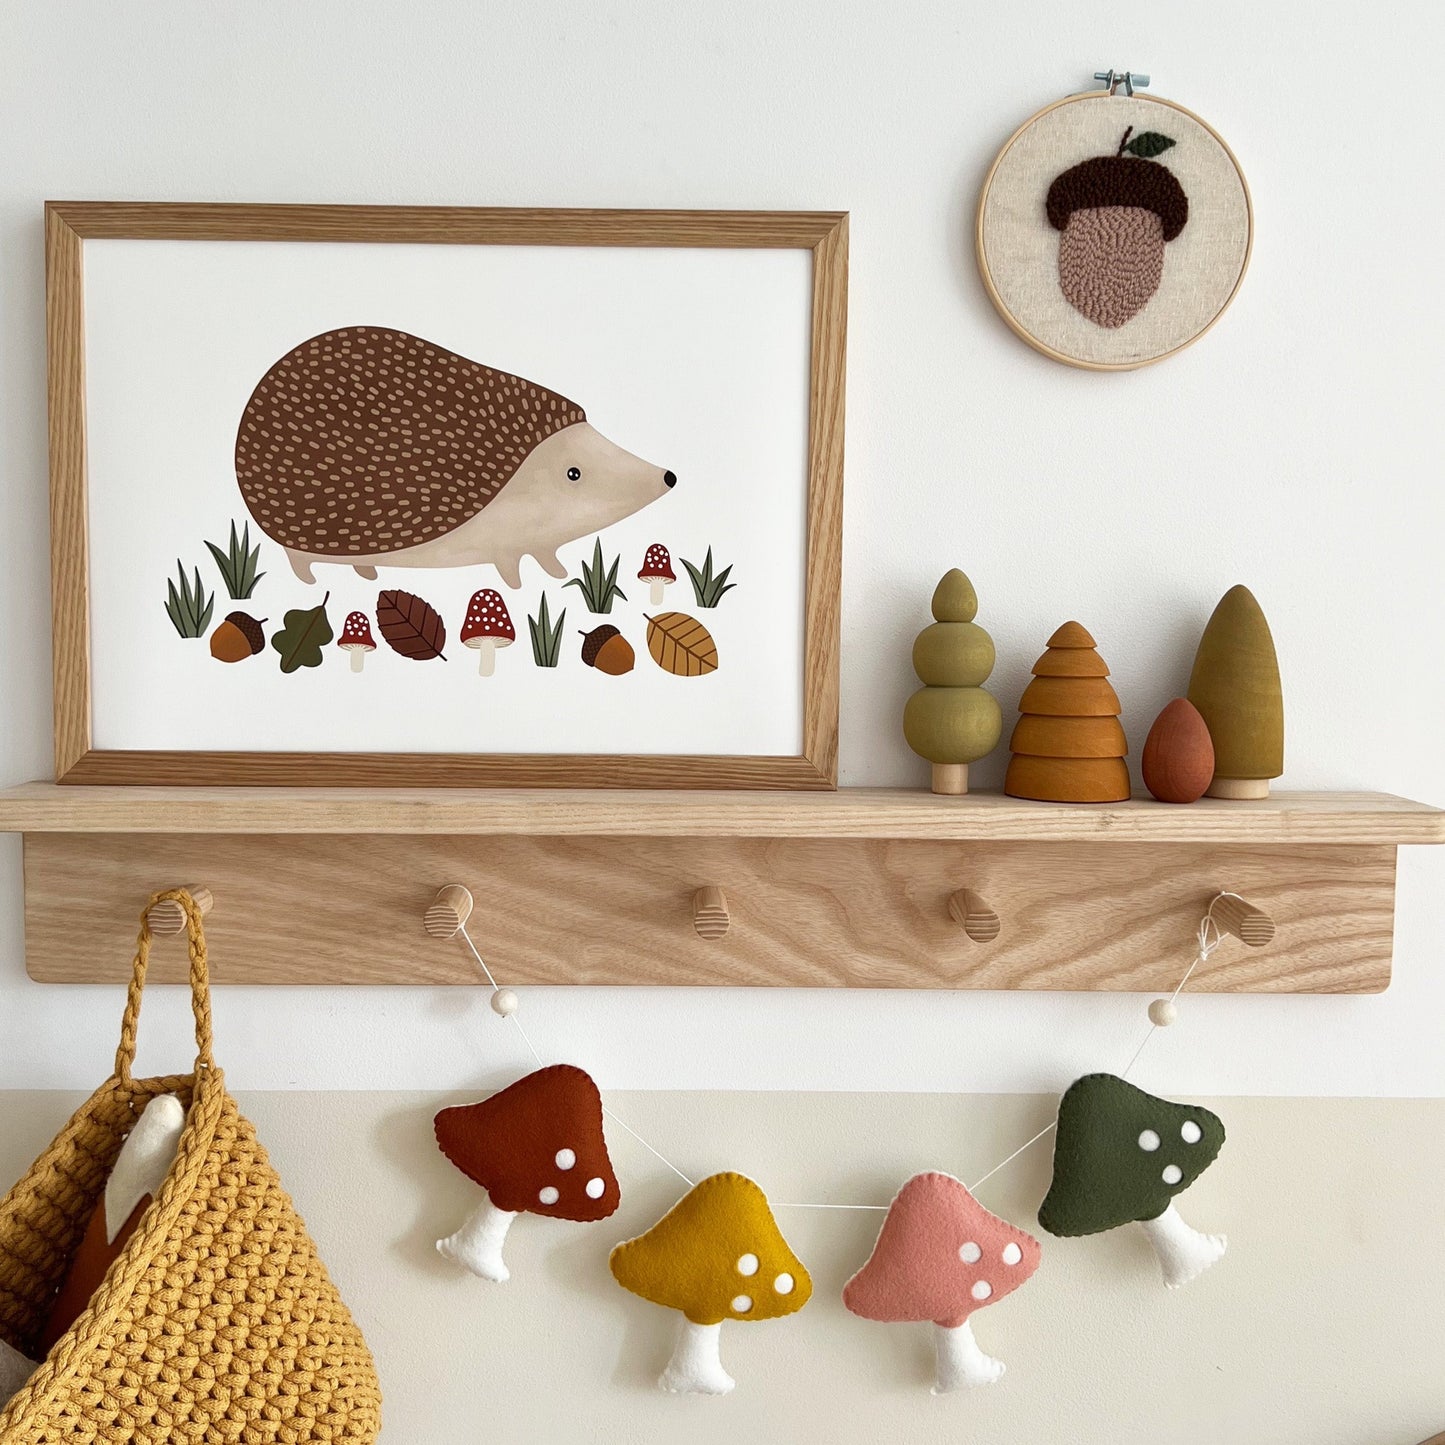 Hedgehog Art Print In White by Kid of the Village (6 Sizes Available)